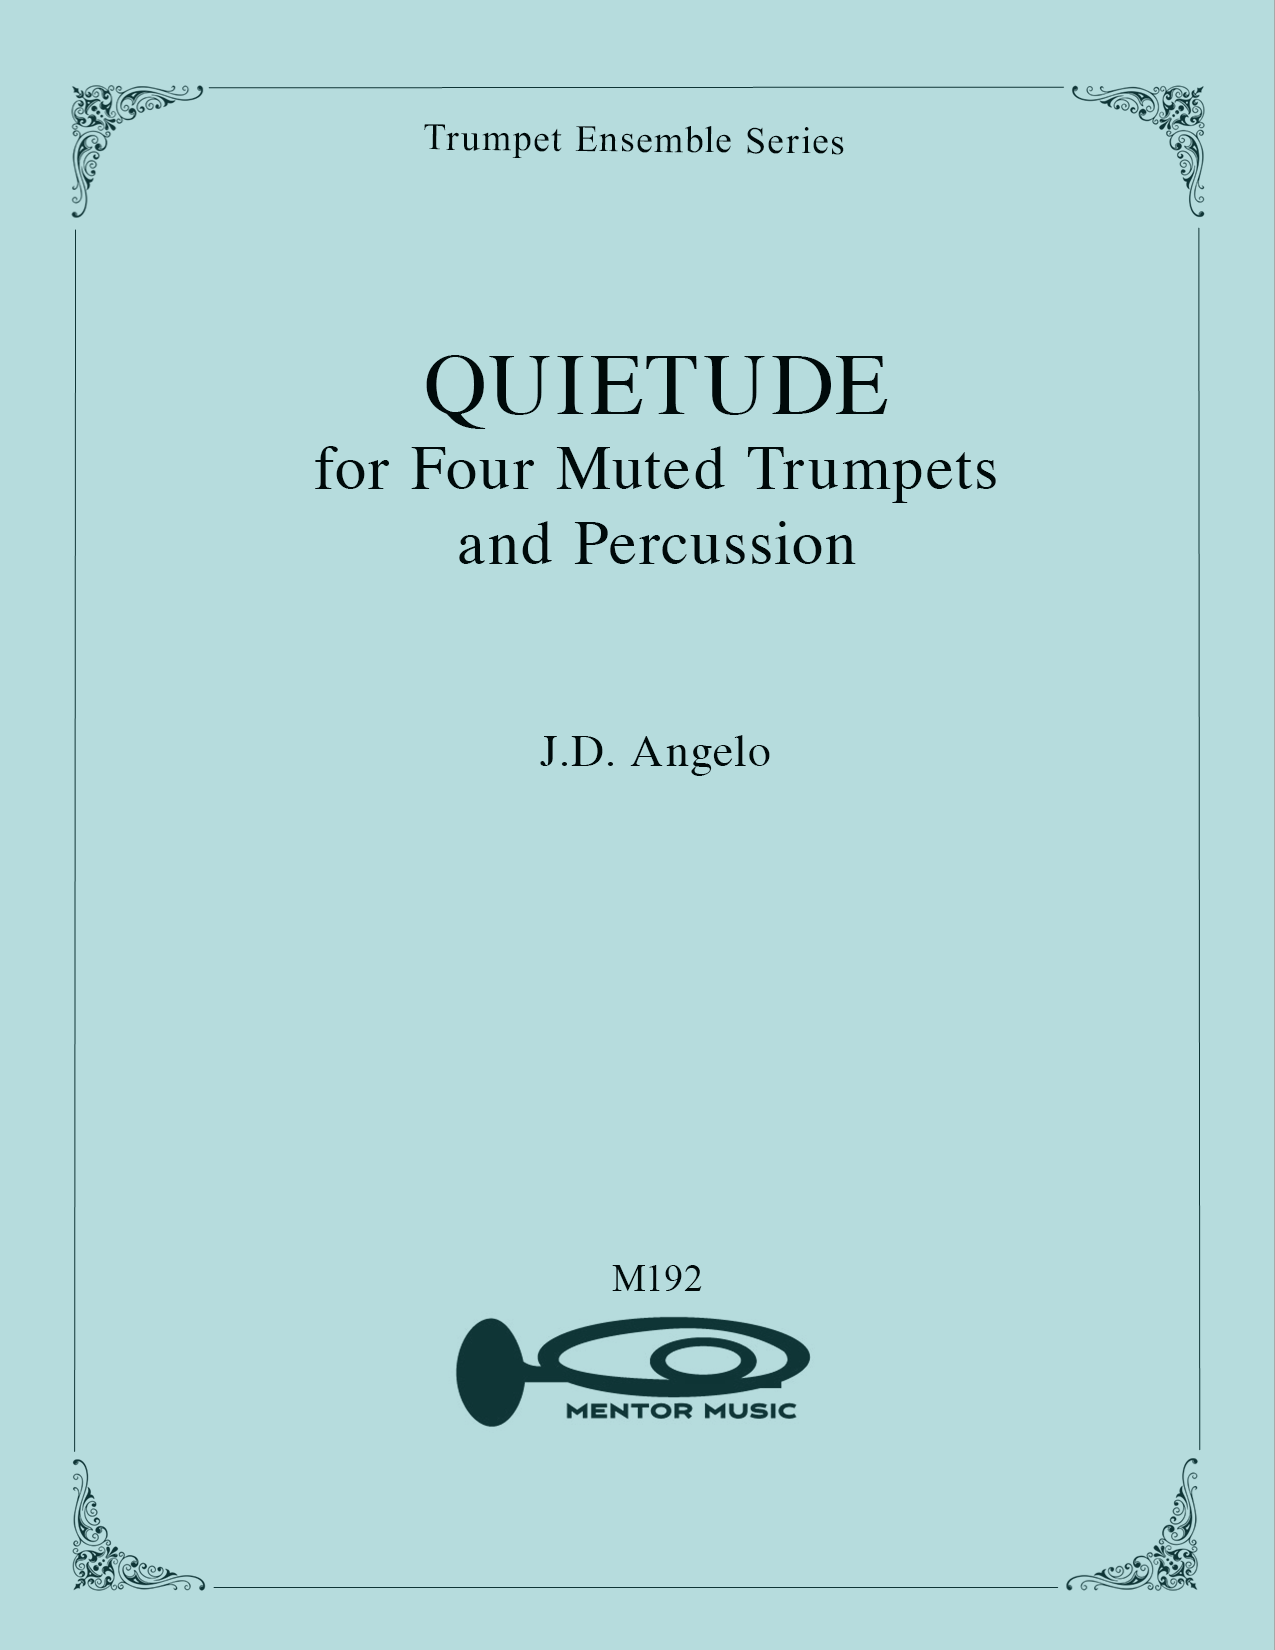 Quietude for 4 Muted Trumpets & Percussion